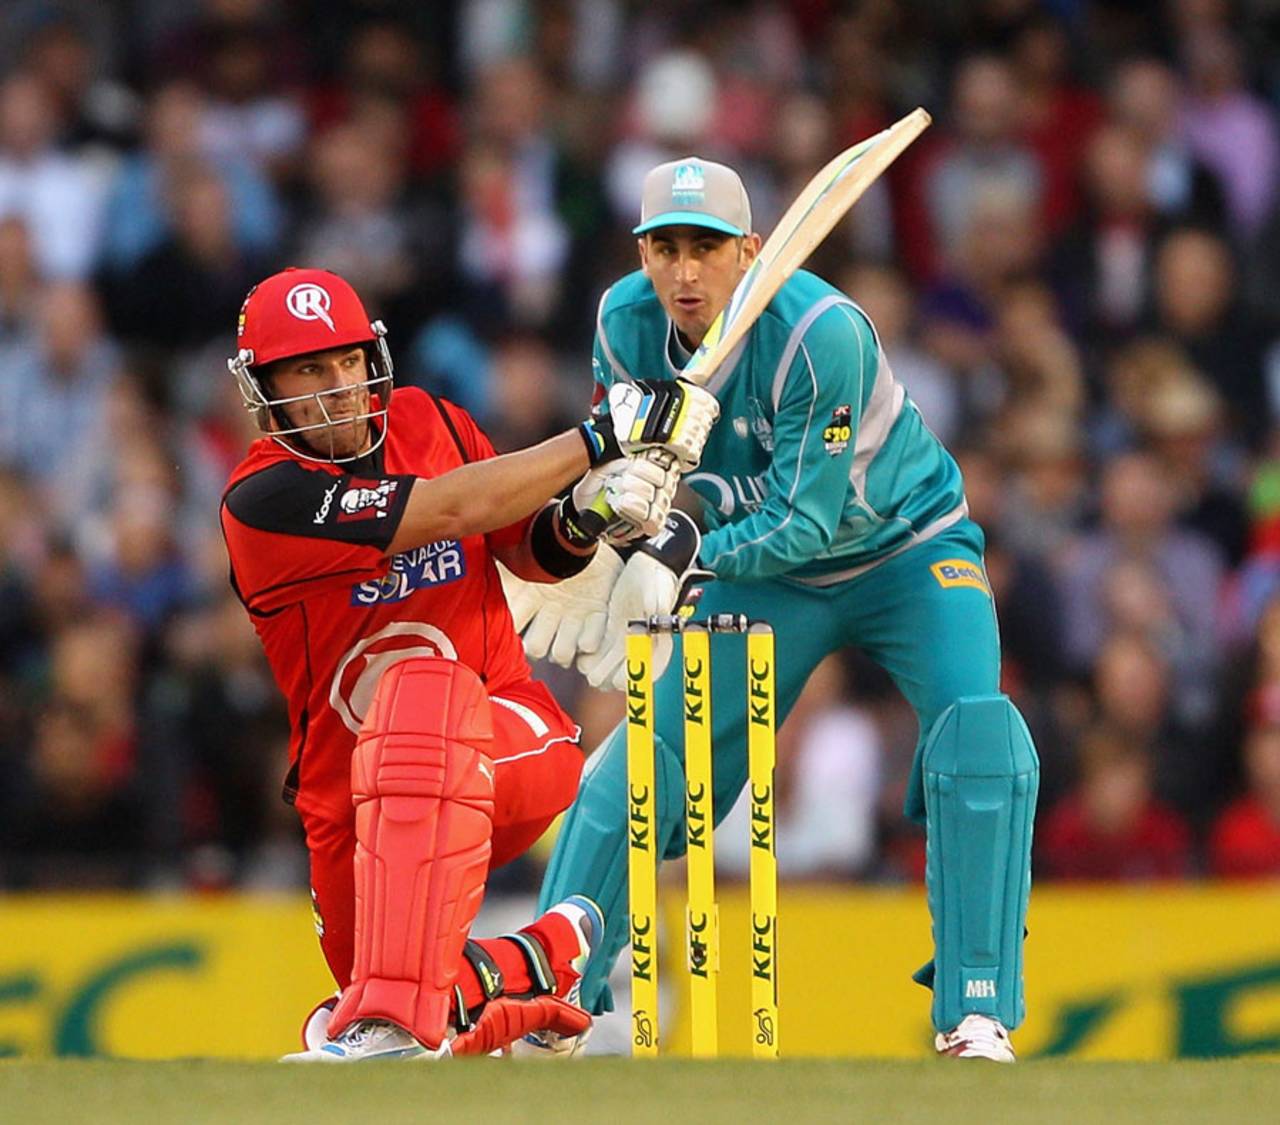 We know Aaron Finch is a good T20 batsman but it's time the number crunchers measured factors like "run-out involvements" and "strike ratio"&nbsp;&nbsp;&bull;&nbsp;&nbsp;Getty Images